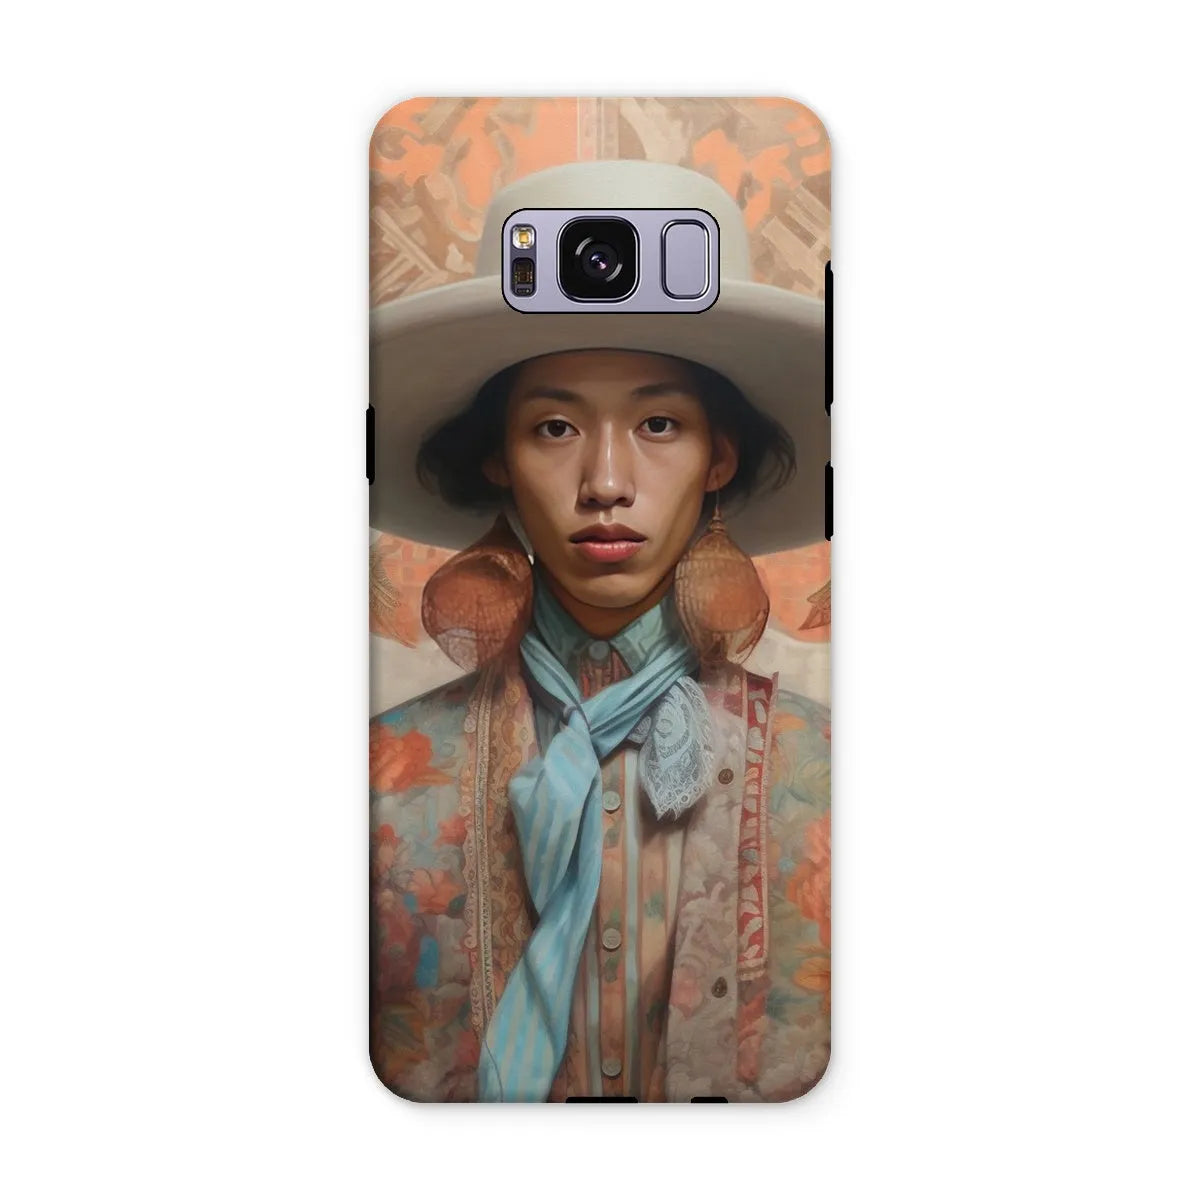 Iyaan - Gay Malay Asian Cowboy Aesthetic Art Phone Case - Samsung Galaxy S8 Plus / Matte - Mobile Phone Cases